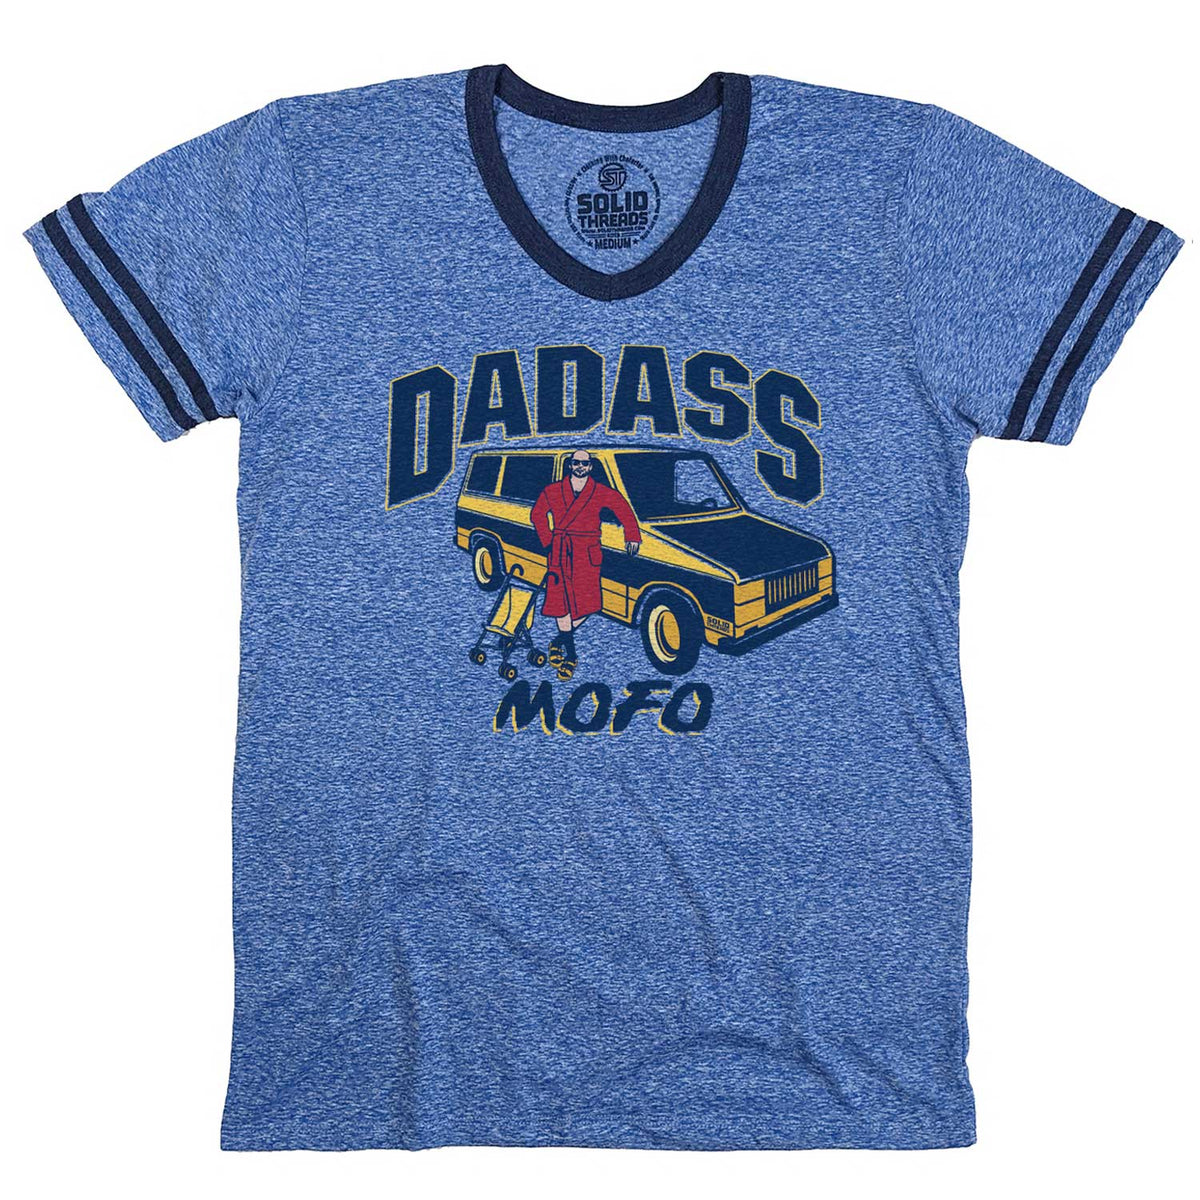 Men&#39;s Dadass Vintage Graphic V-Neck Tee | Funny Dad T-shirt | Solid Threads